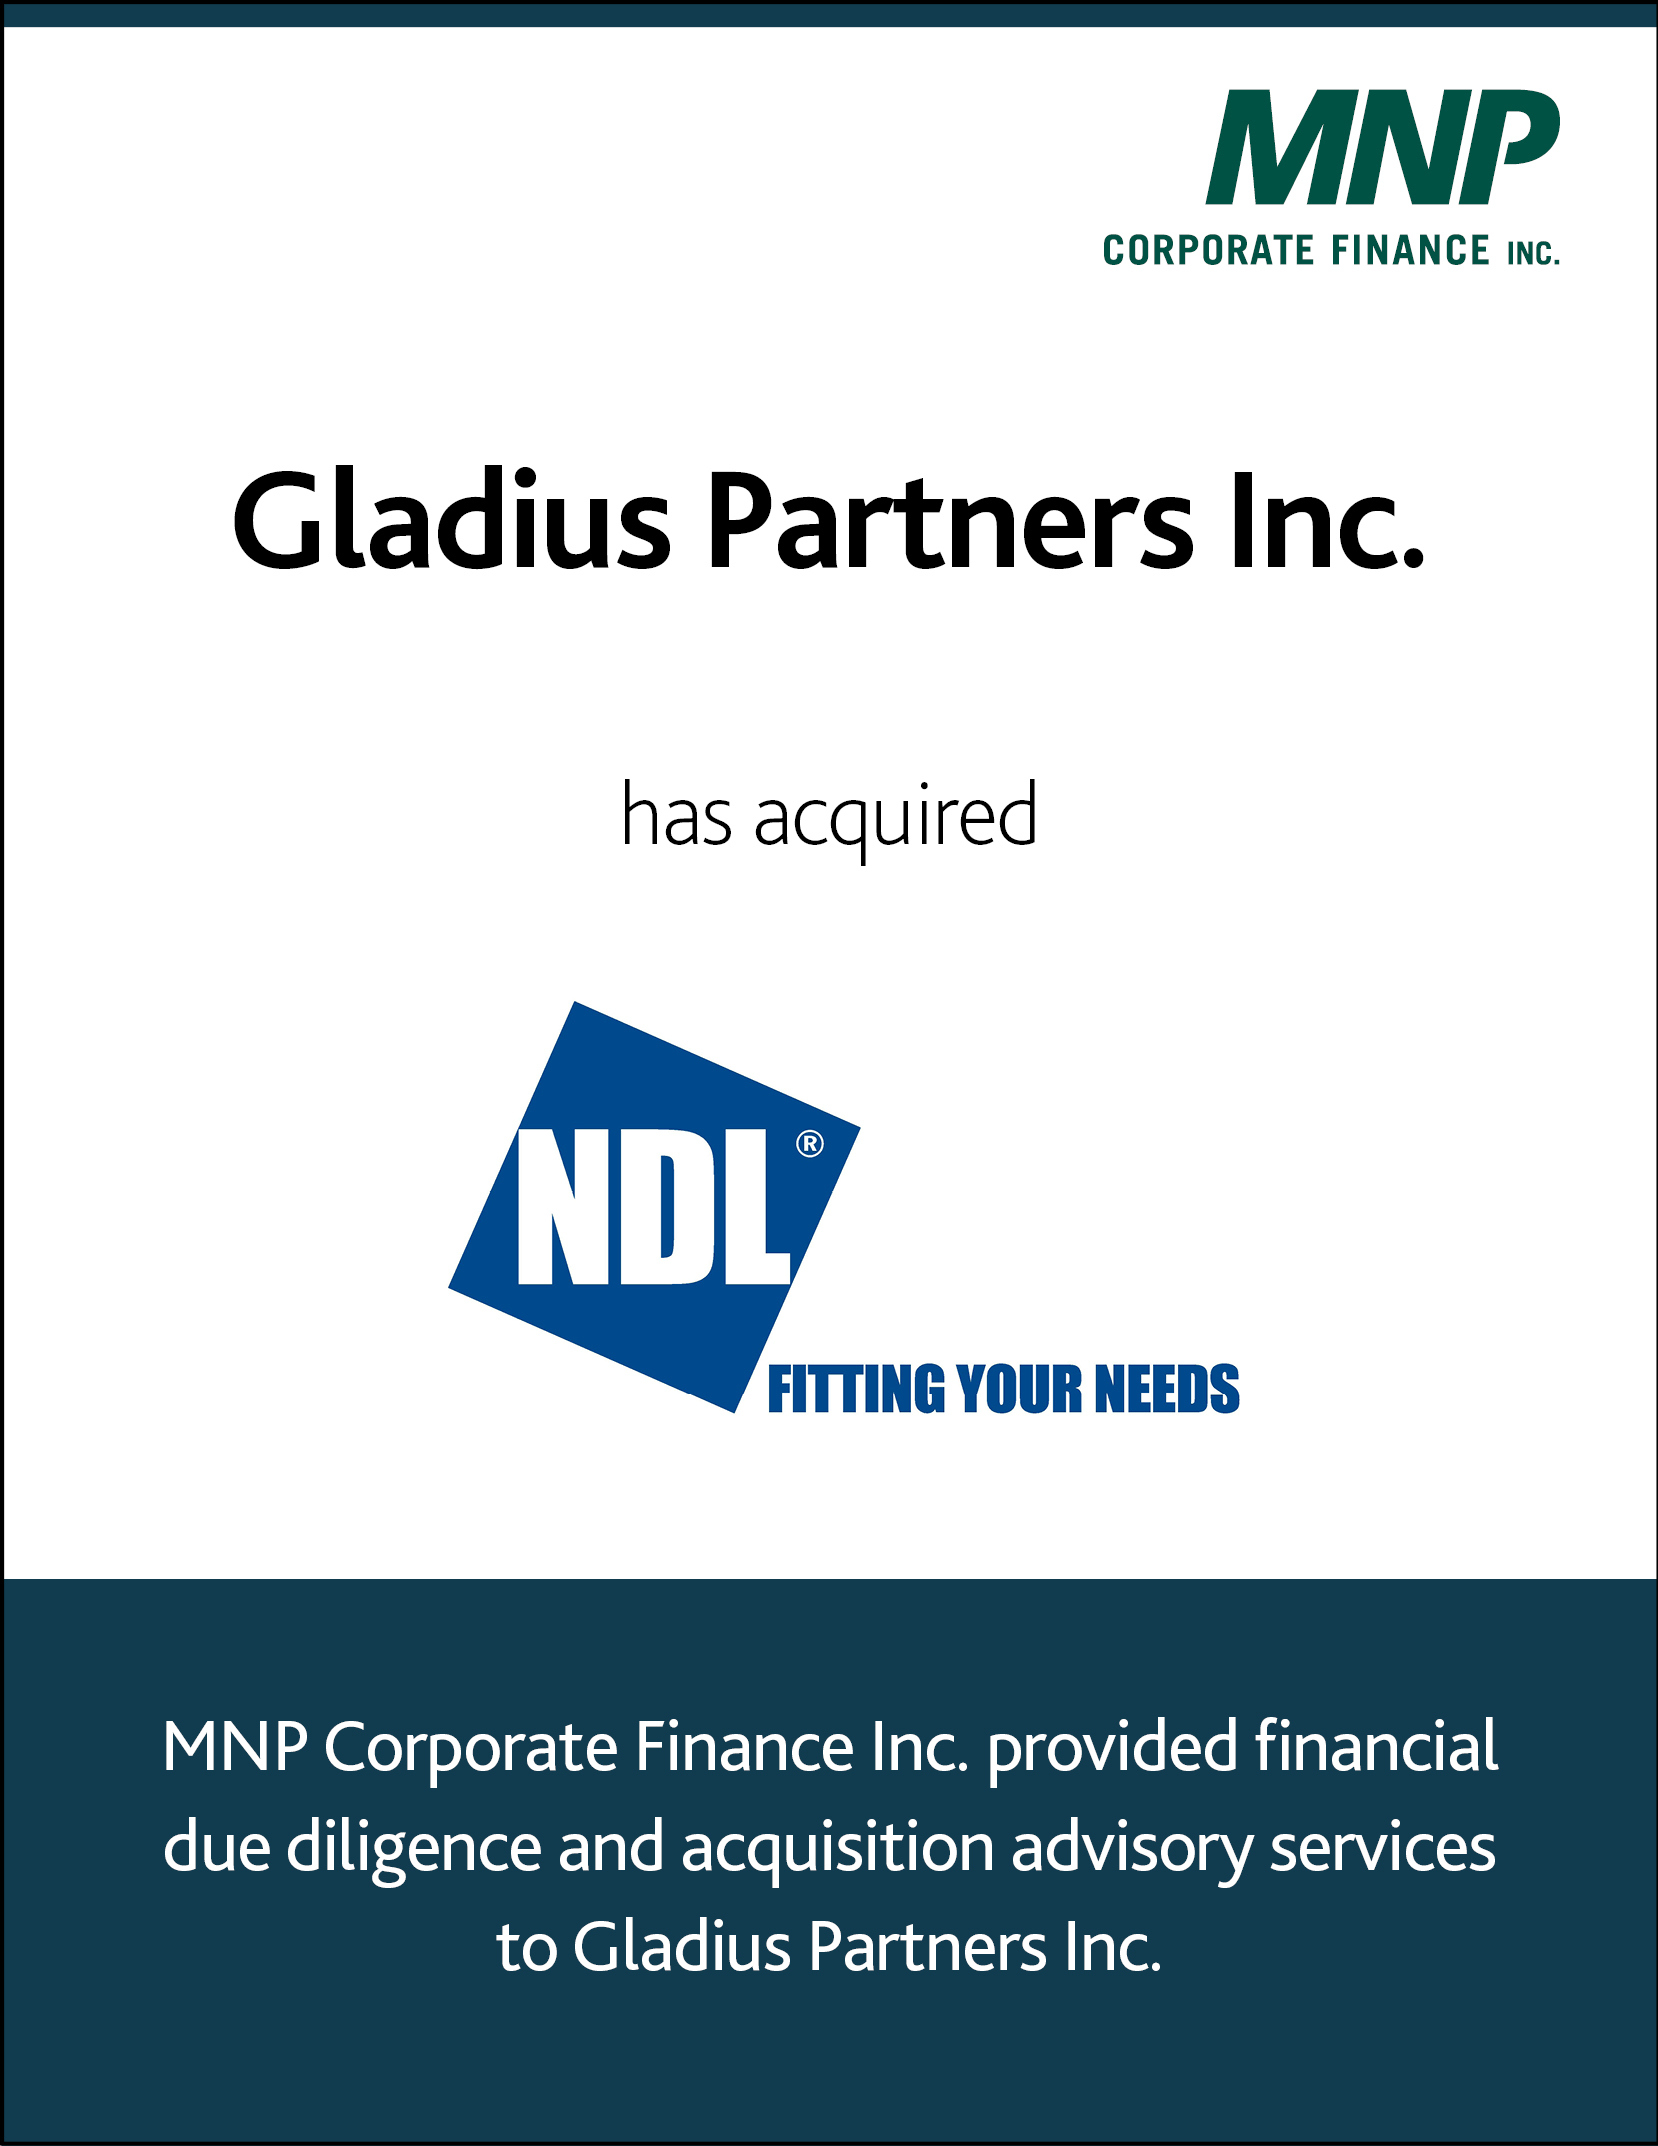 Gladius Partners Inc has acquired NDL Fitting your needs